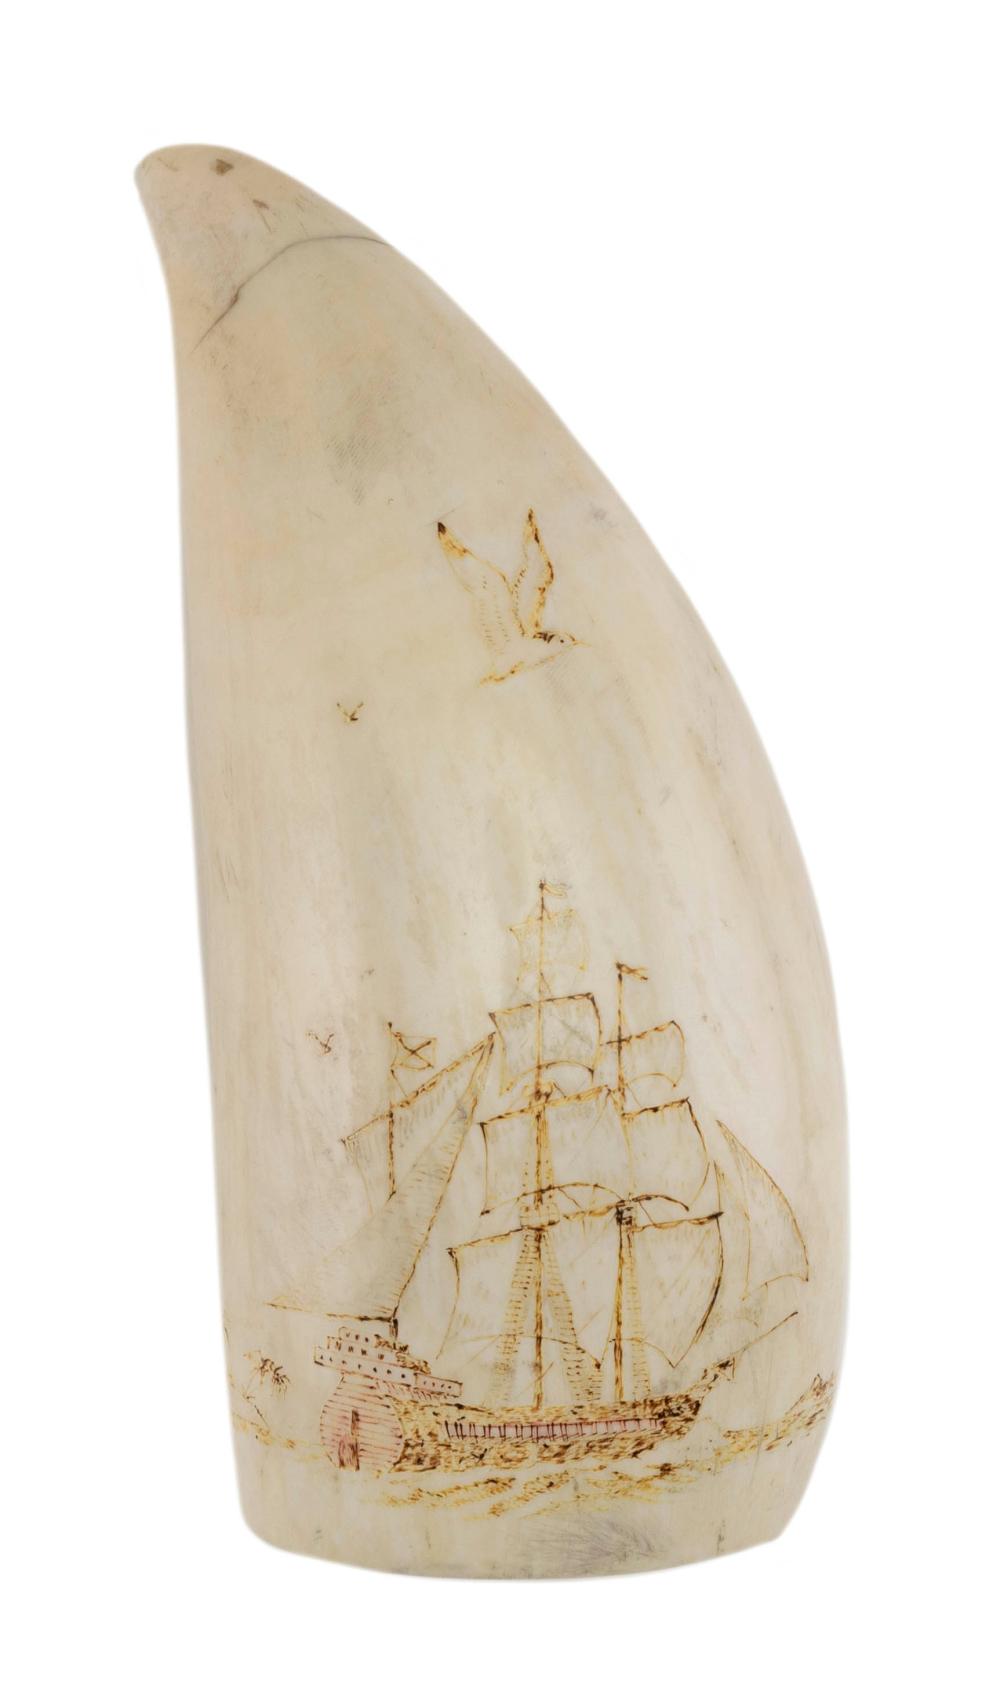 ESKIMO ENGRAVED WHALE S TOOTH 30b6ca